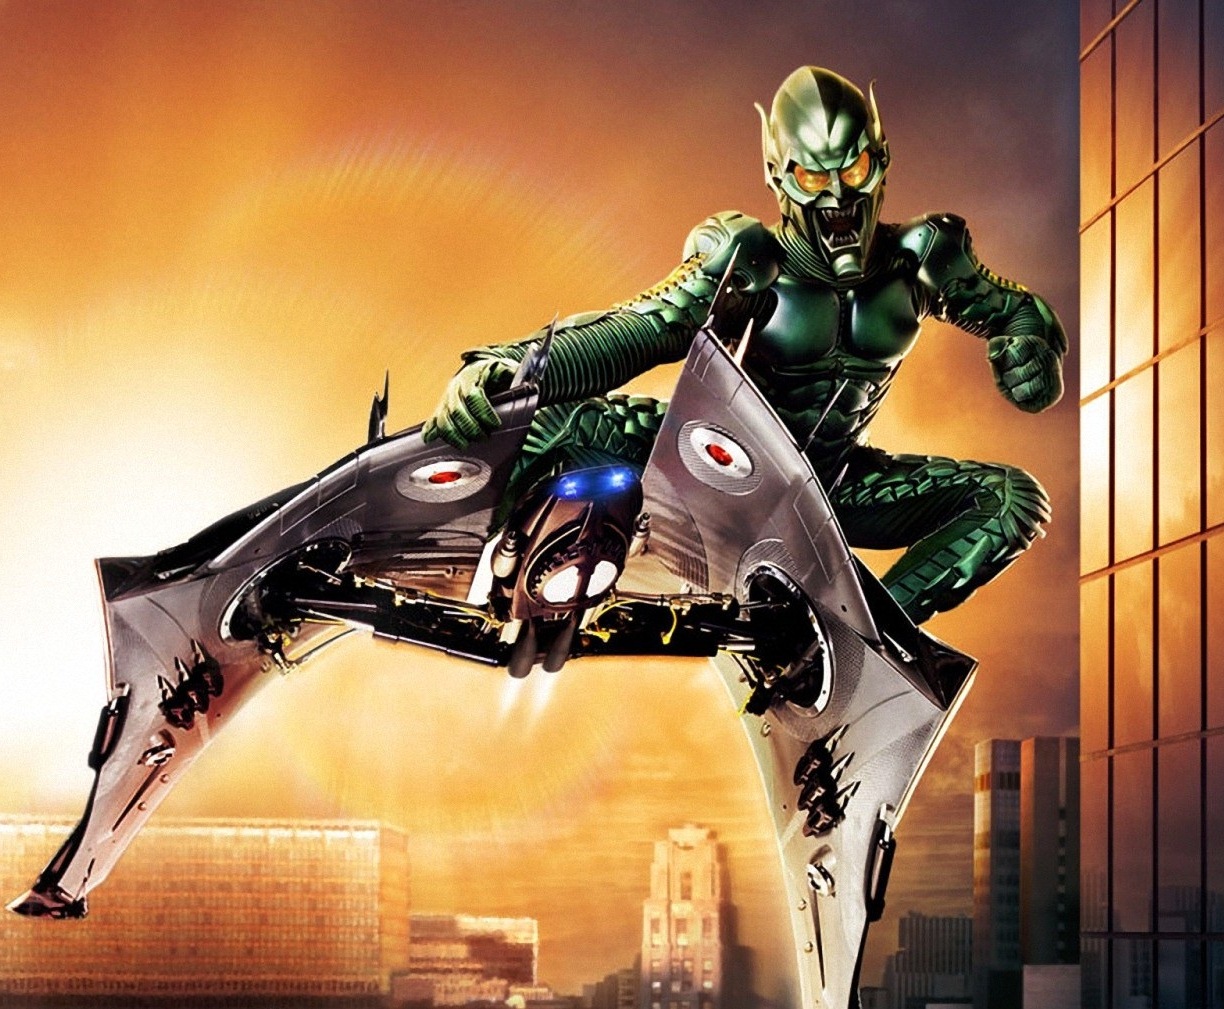 U.S. soldiers could fly into battle on jet-powered platforms like Spiderman’s Green Goblin